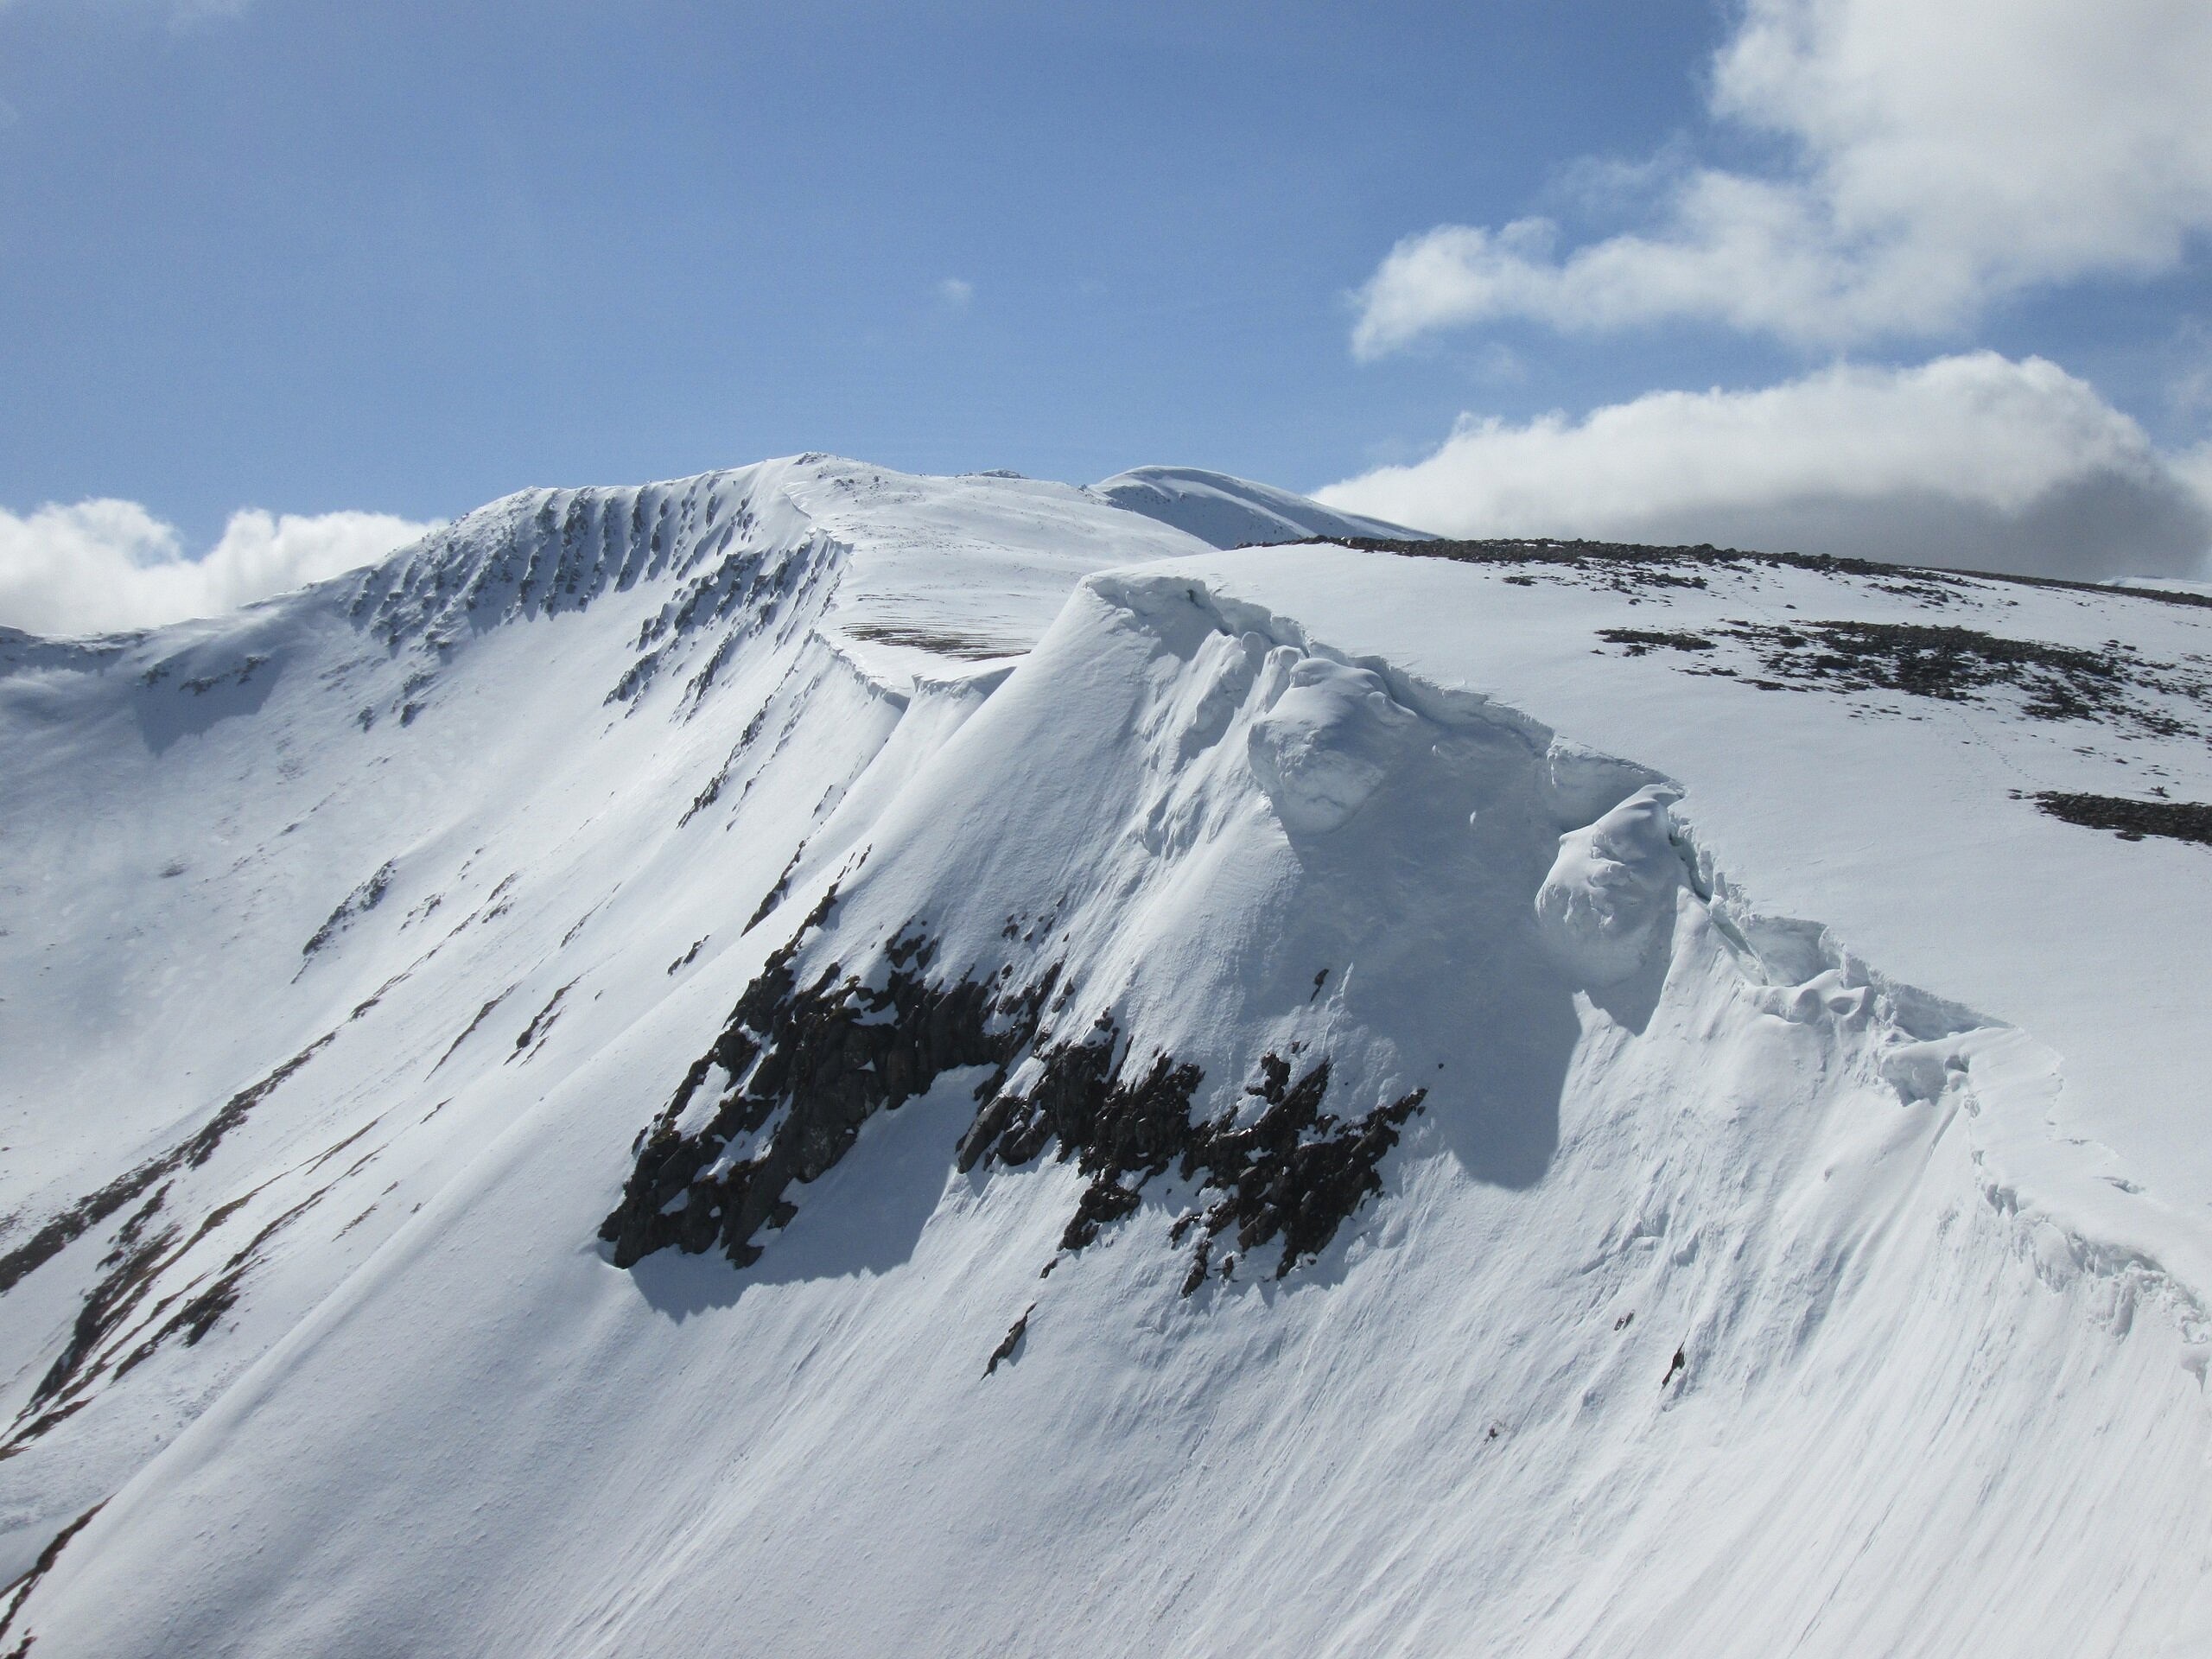 Stob Coire Claurigh, Grey Corries. Docharty climbed this in the dark in a snowstorm  © Iain Thow